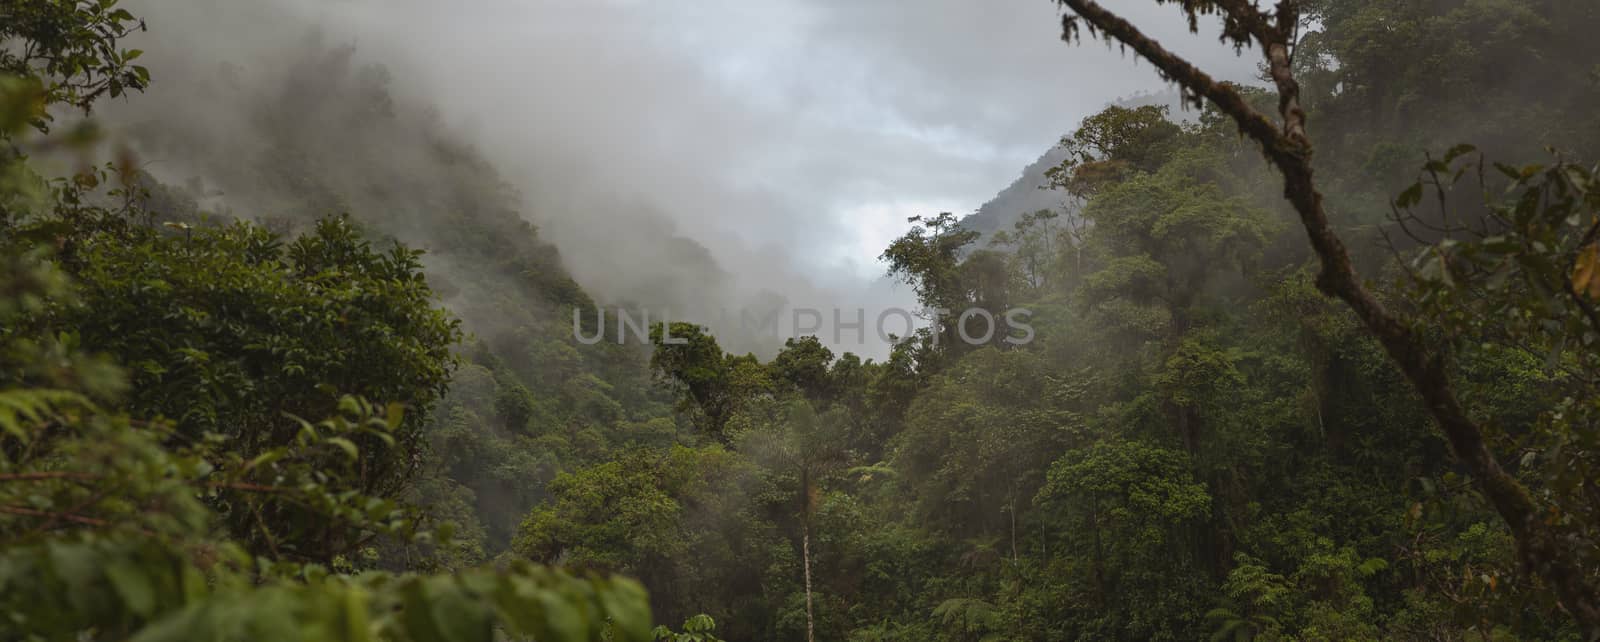 Cloud Forest in Peru, panoramic view by alvarobueno